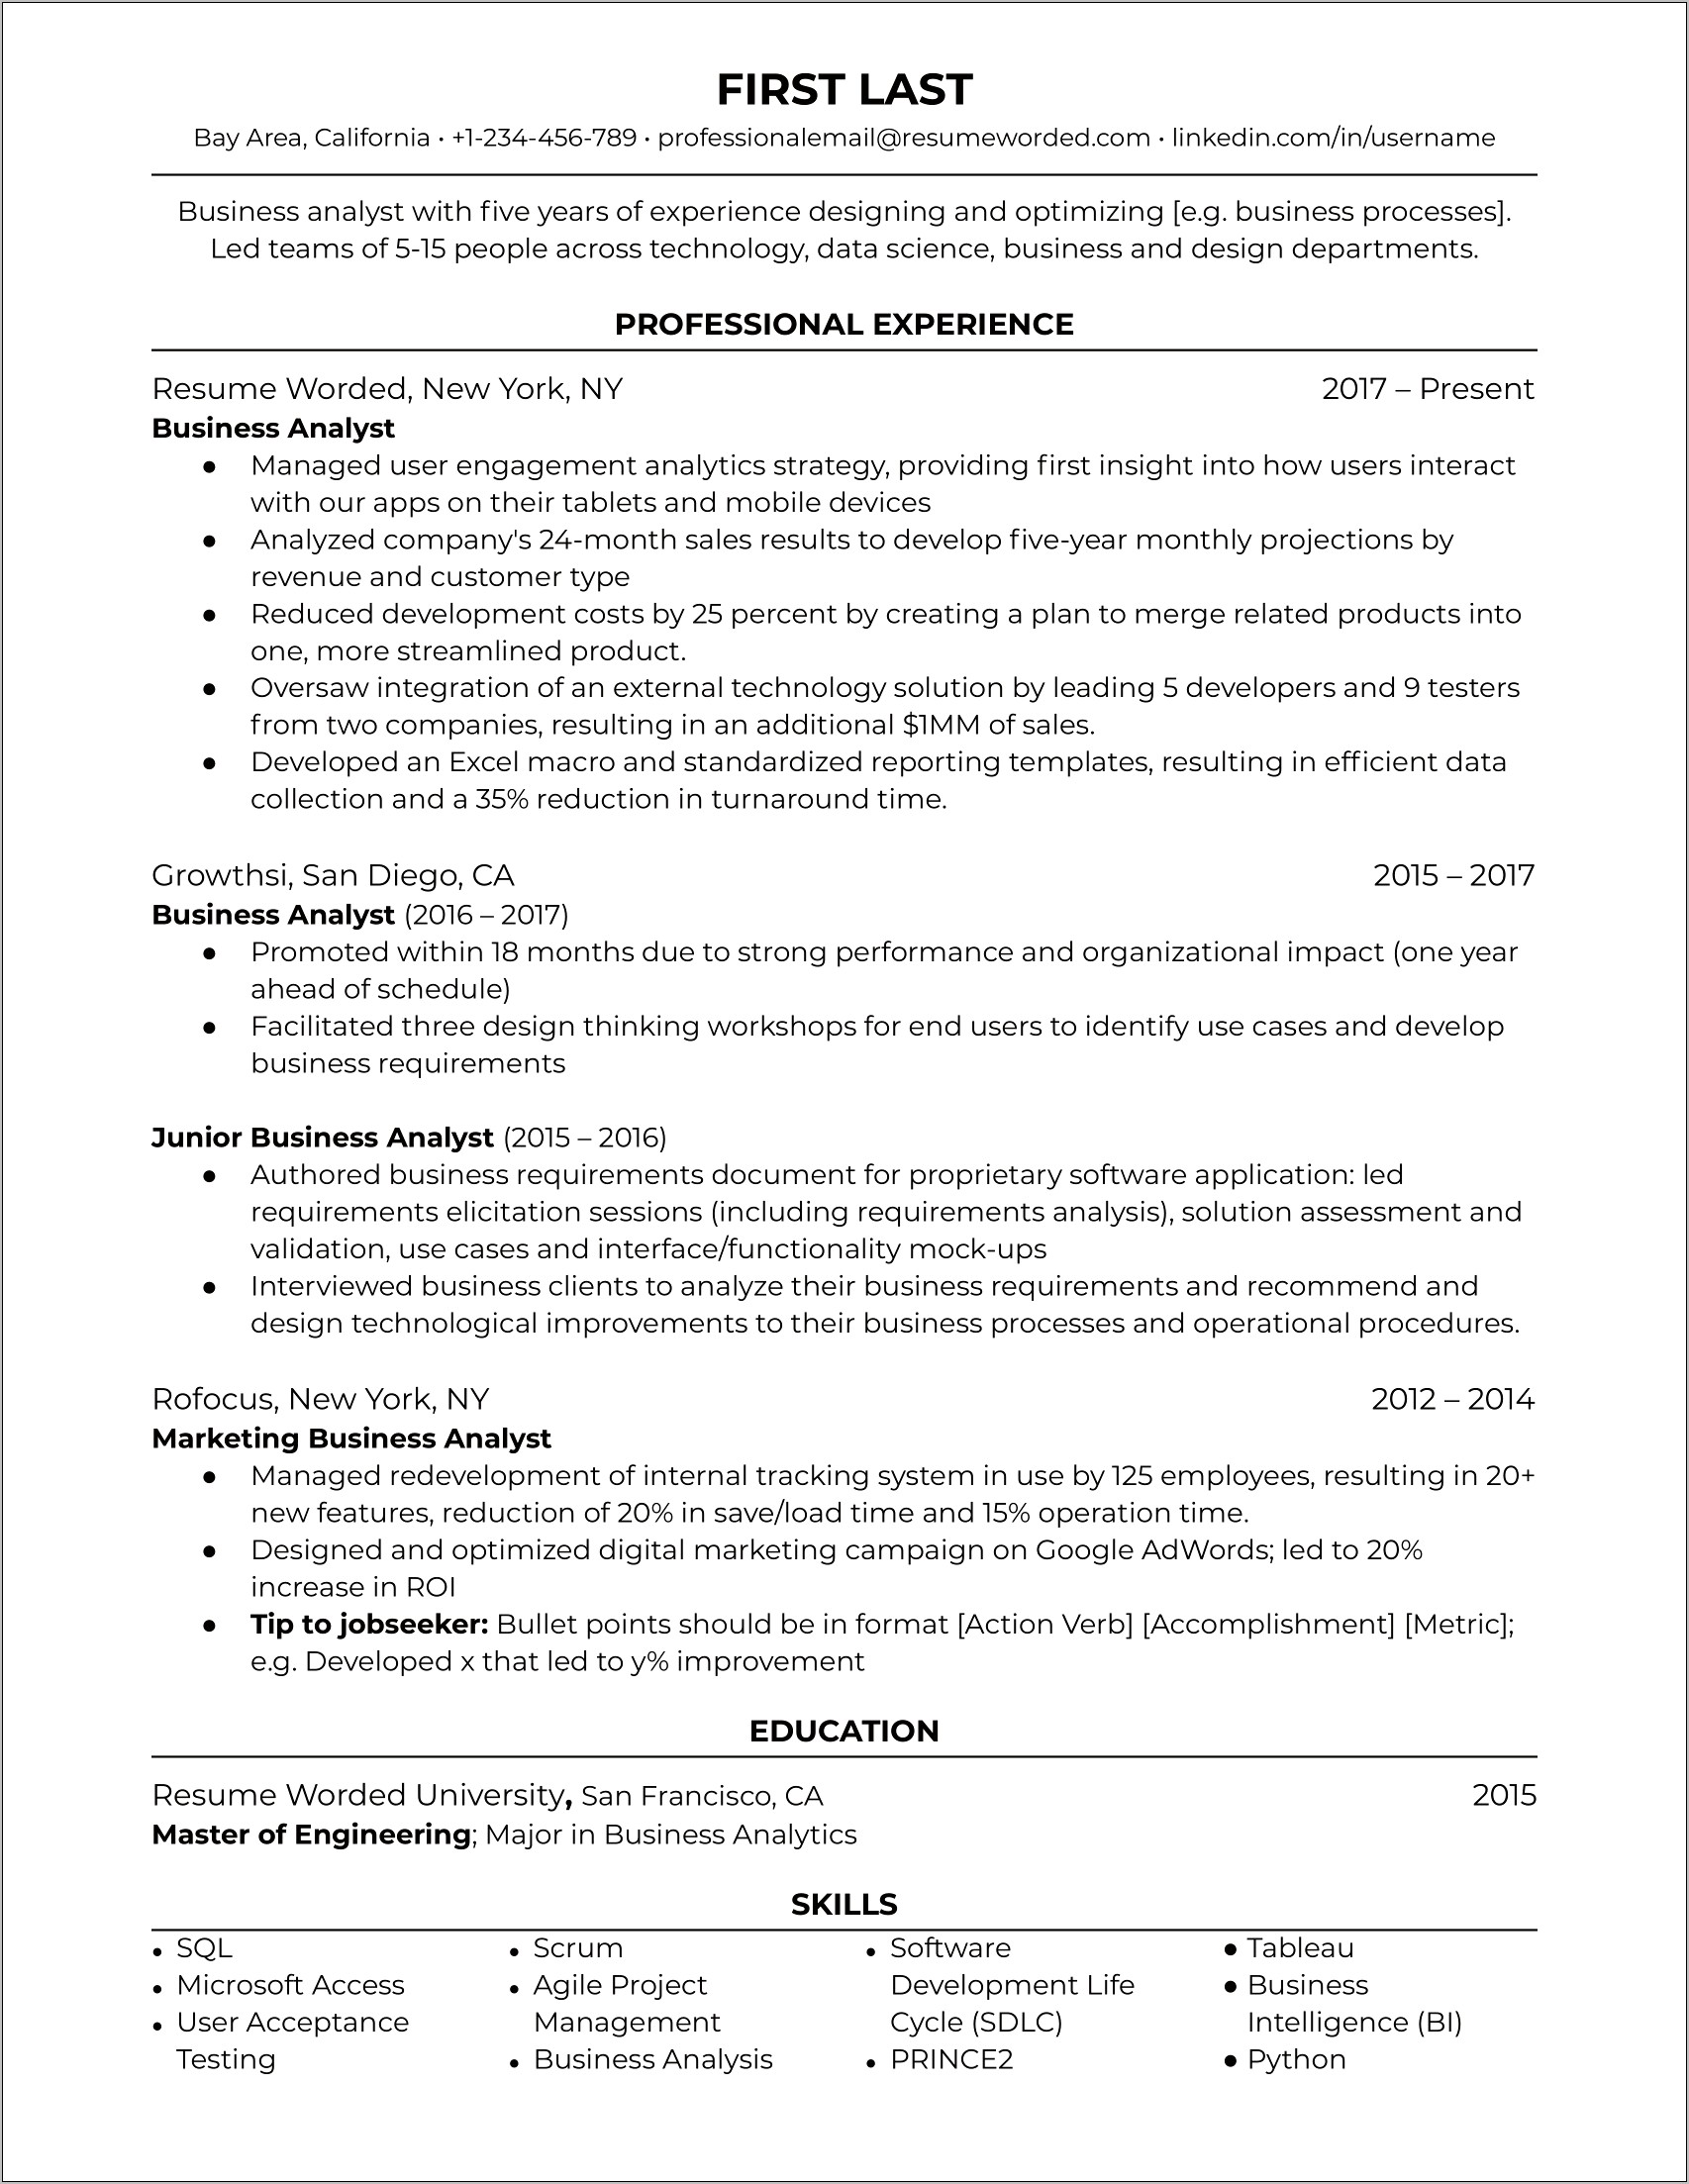 Business Analyst Resume Objective Statements